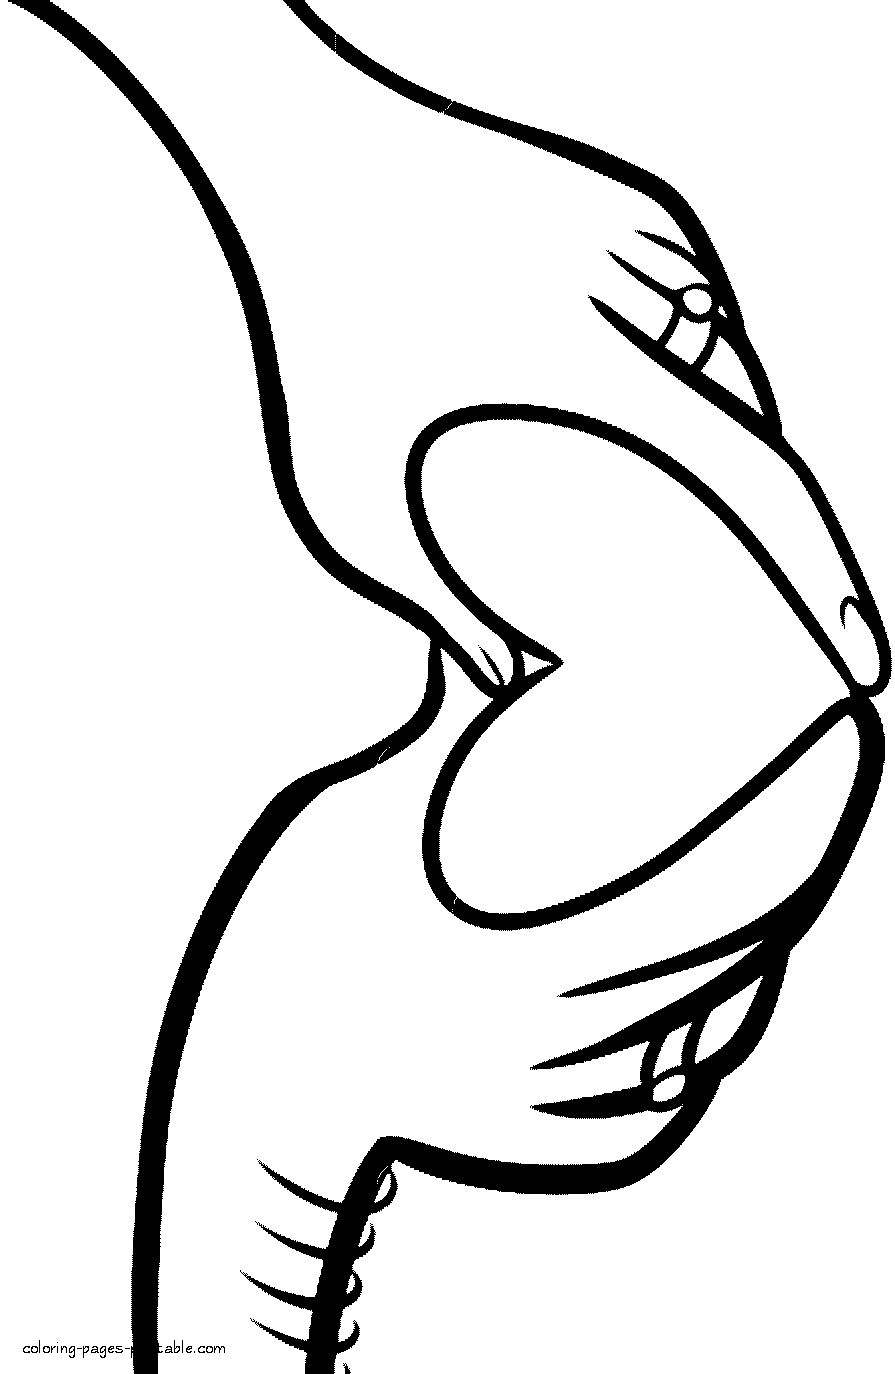 Hands in heart shape coloring page